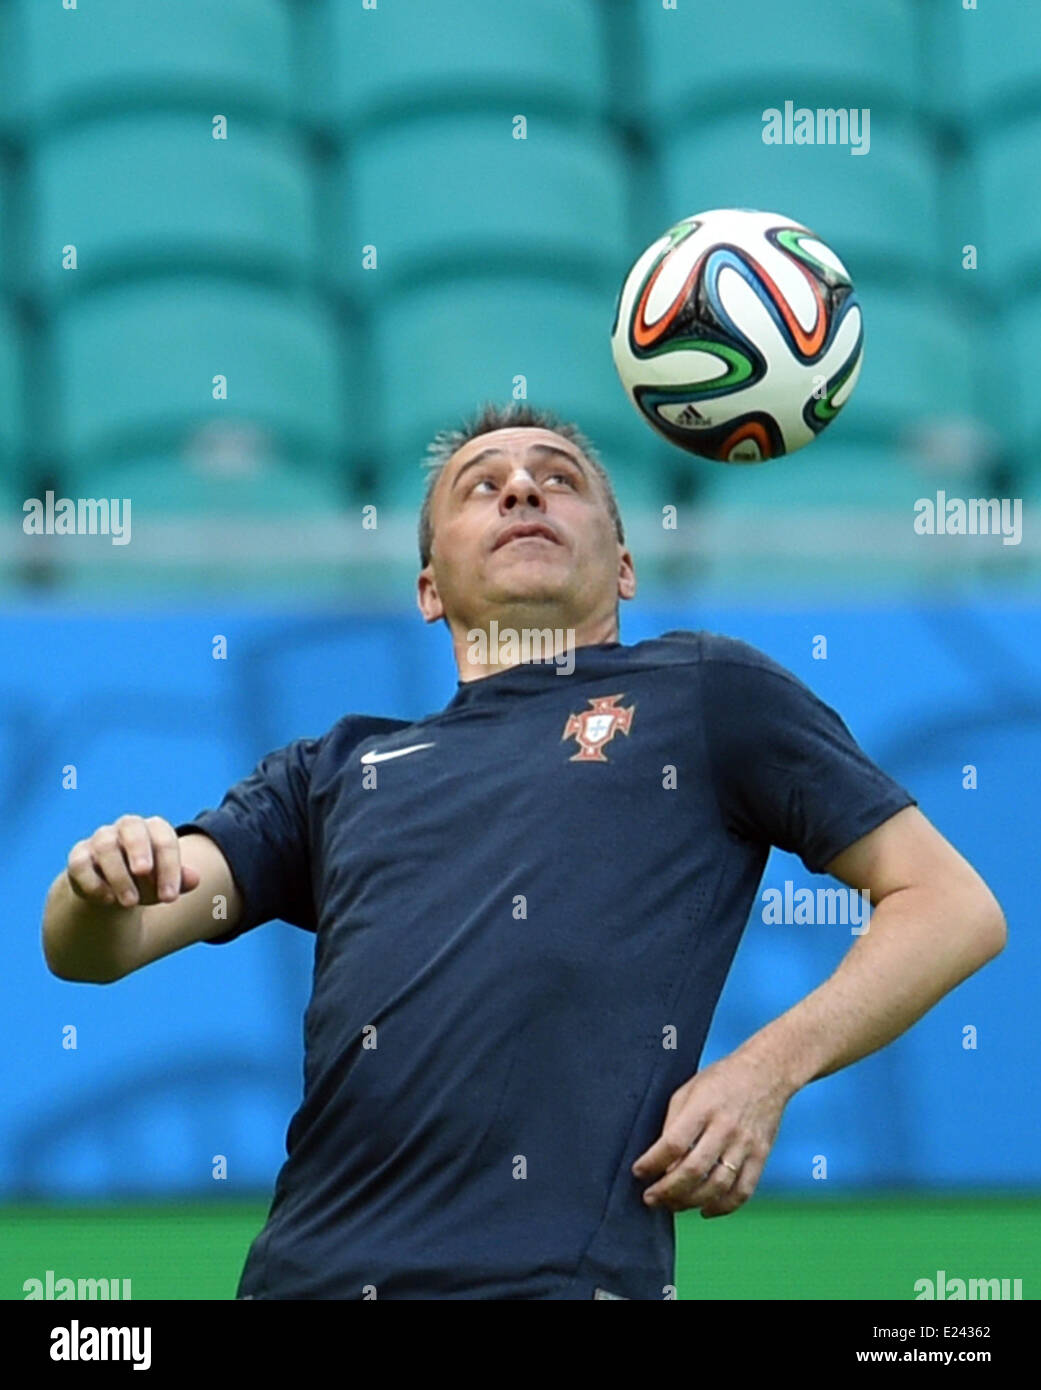 Salvador da Bahia, Brazil. 15th June, 2014. Head coach Paulo Bento in action during a training session of the Portugal's national soccer team at the Arena Fonte Nova Stadium in Salvador da Bahia, Brazil, 15 June 2014. Germany will face Portugal in their group G preliminary round match at the FIFA World Cup 2014 on 16 June 2014 in Salvador da Bahia. Photo: Andreas Gebertt/dpa/Alamy Live News Stock Photo